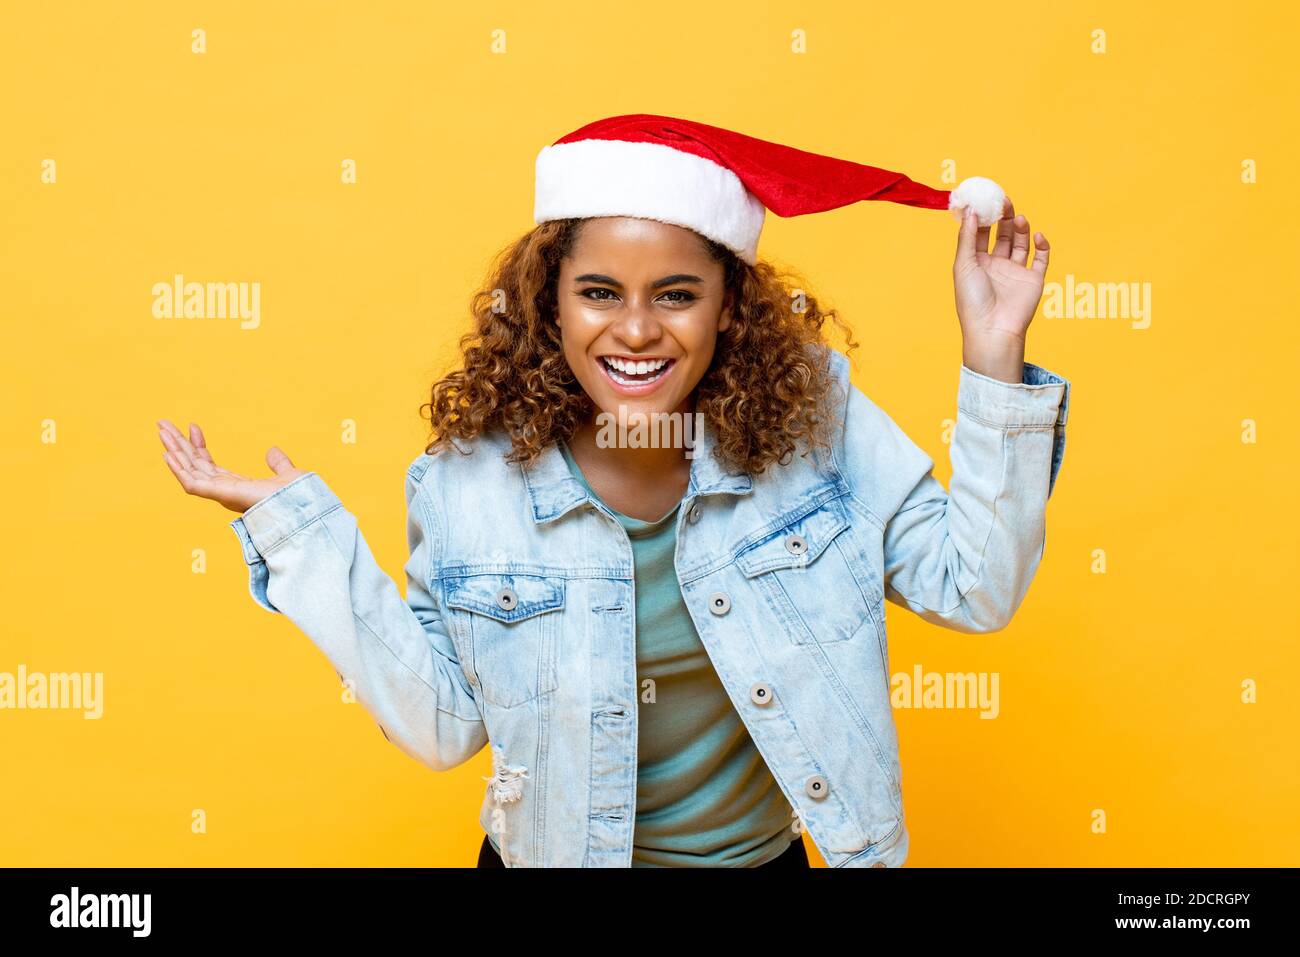 Fun surprised happy African American woman wearing Christmas hat smiling in yellow isolated background Stock Photo